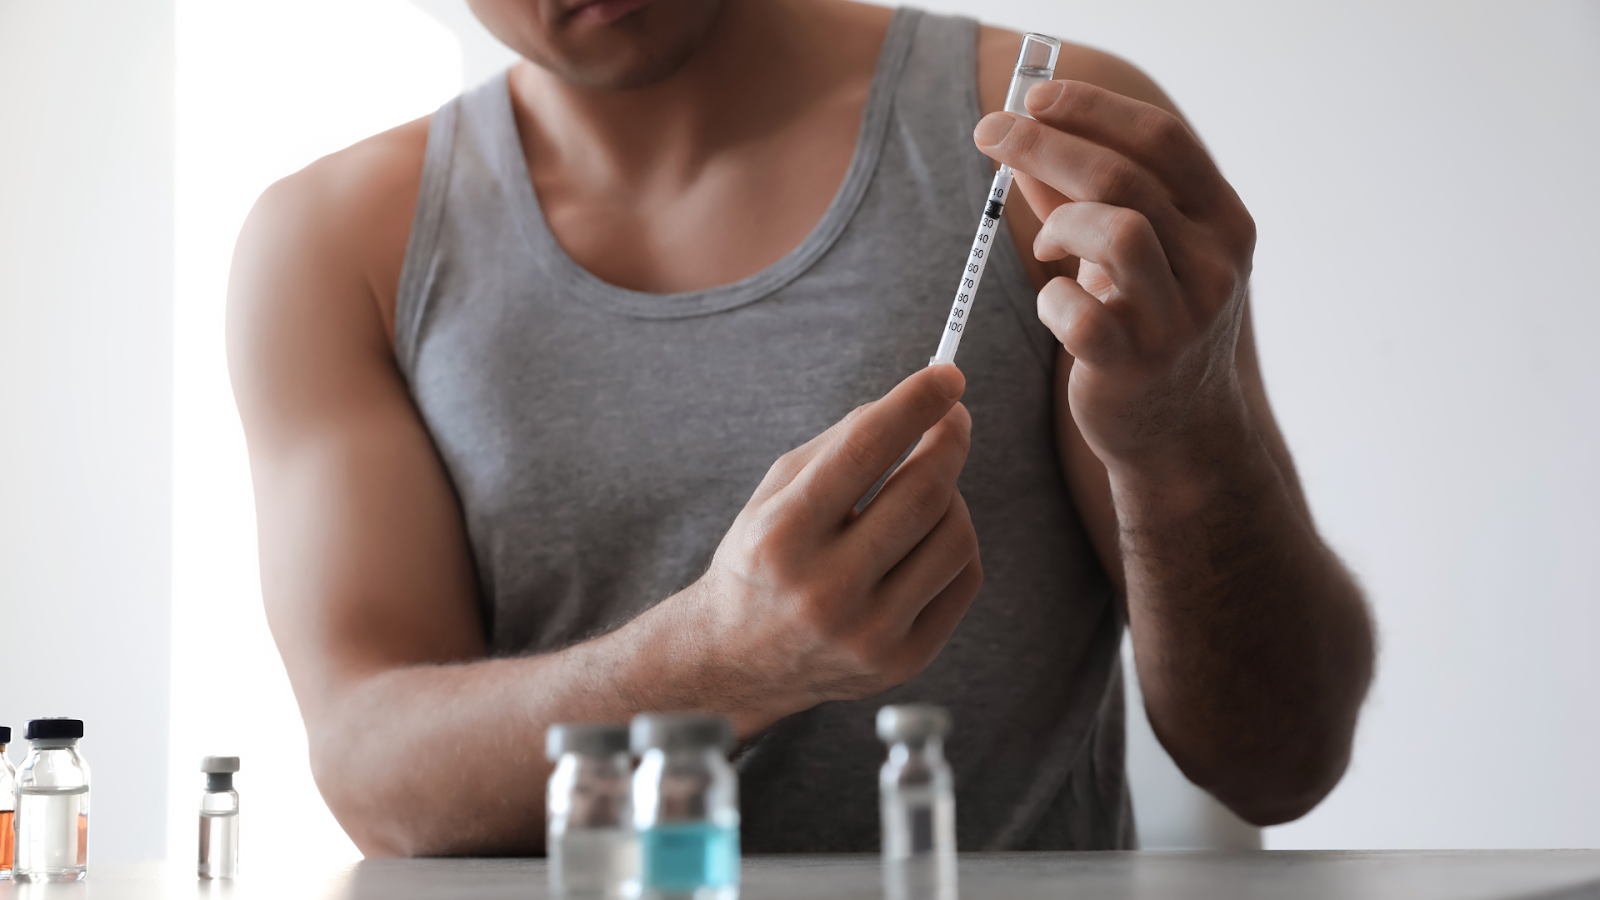 A photo of someone putting drugs into a needle. 